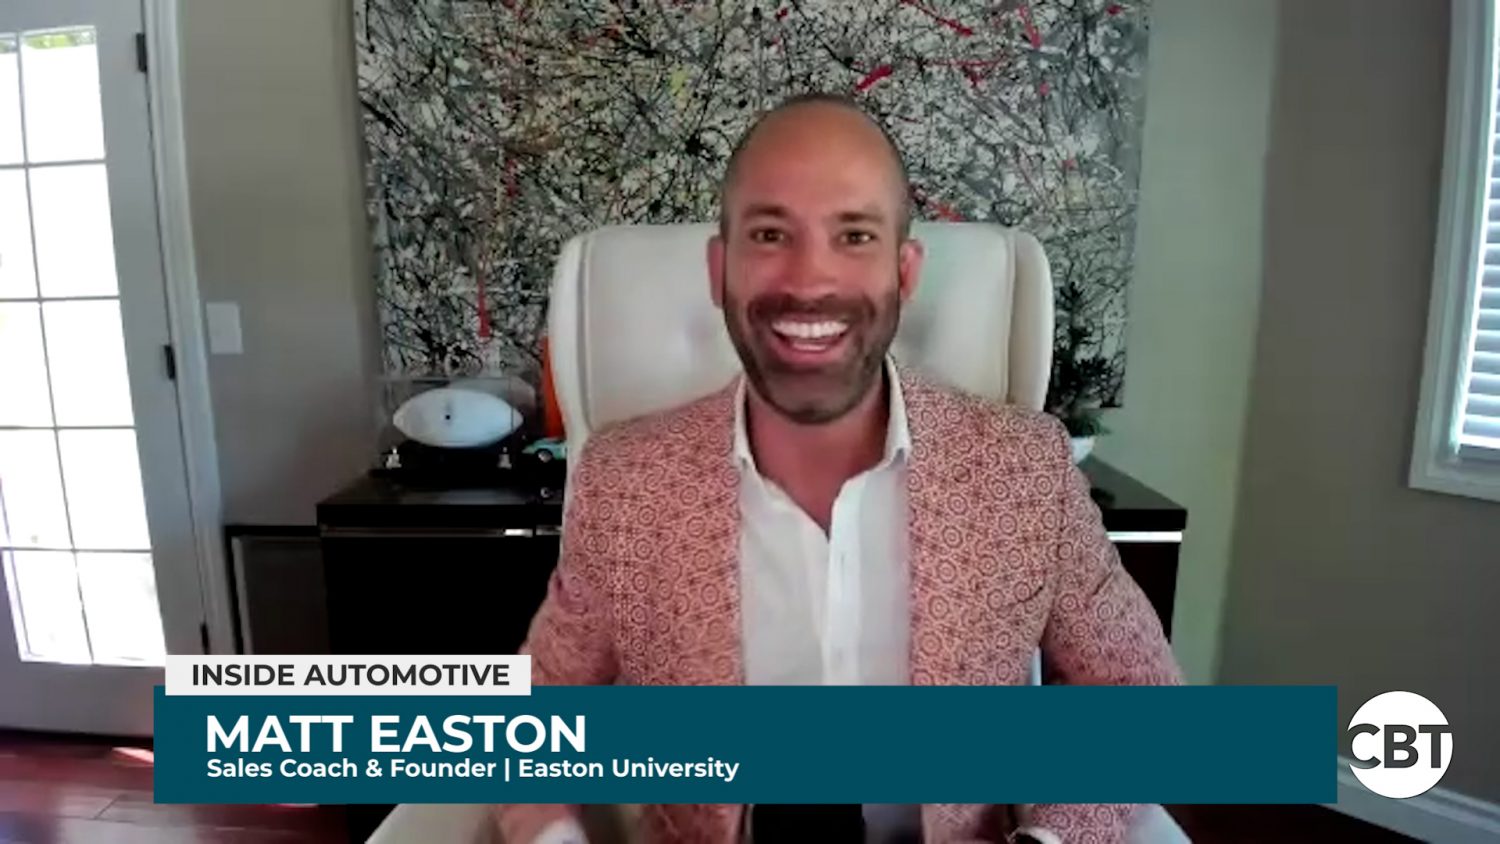 Matt Easton joins us on today to remind us that sometimes getting the sale can be as simple as raising your hand.